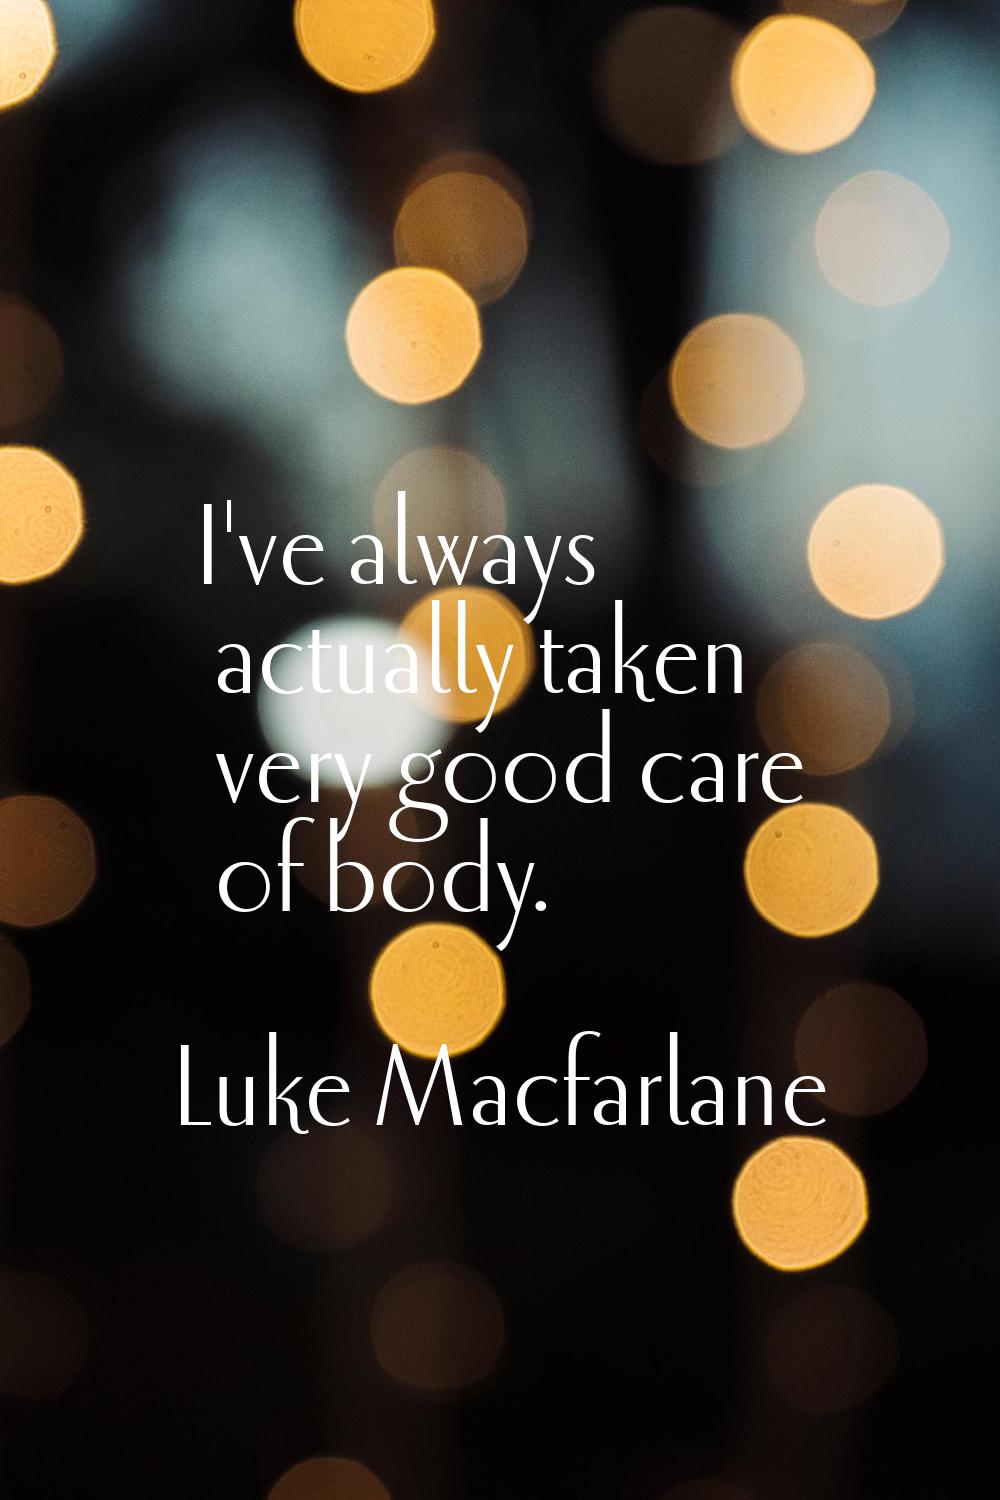 I've always actually taken very good care of body.